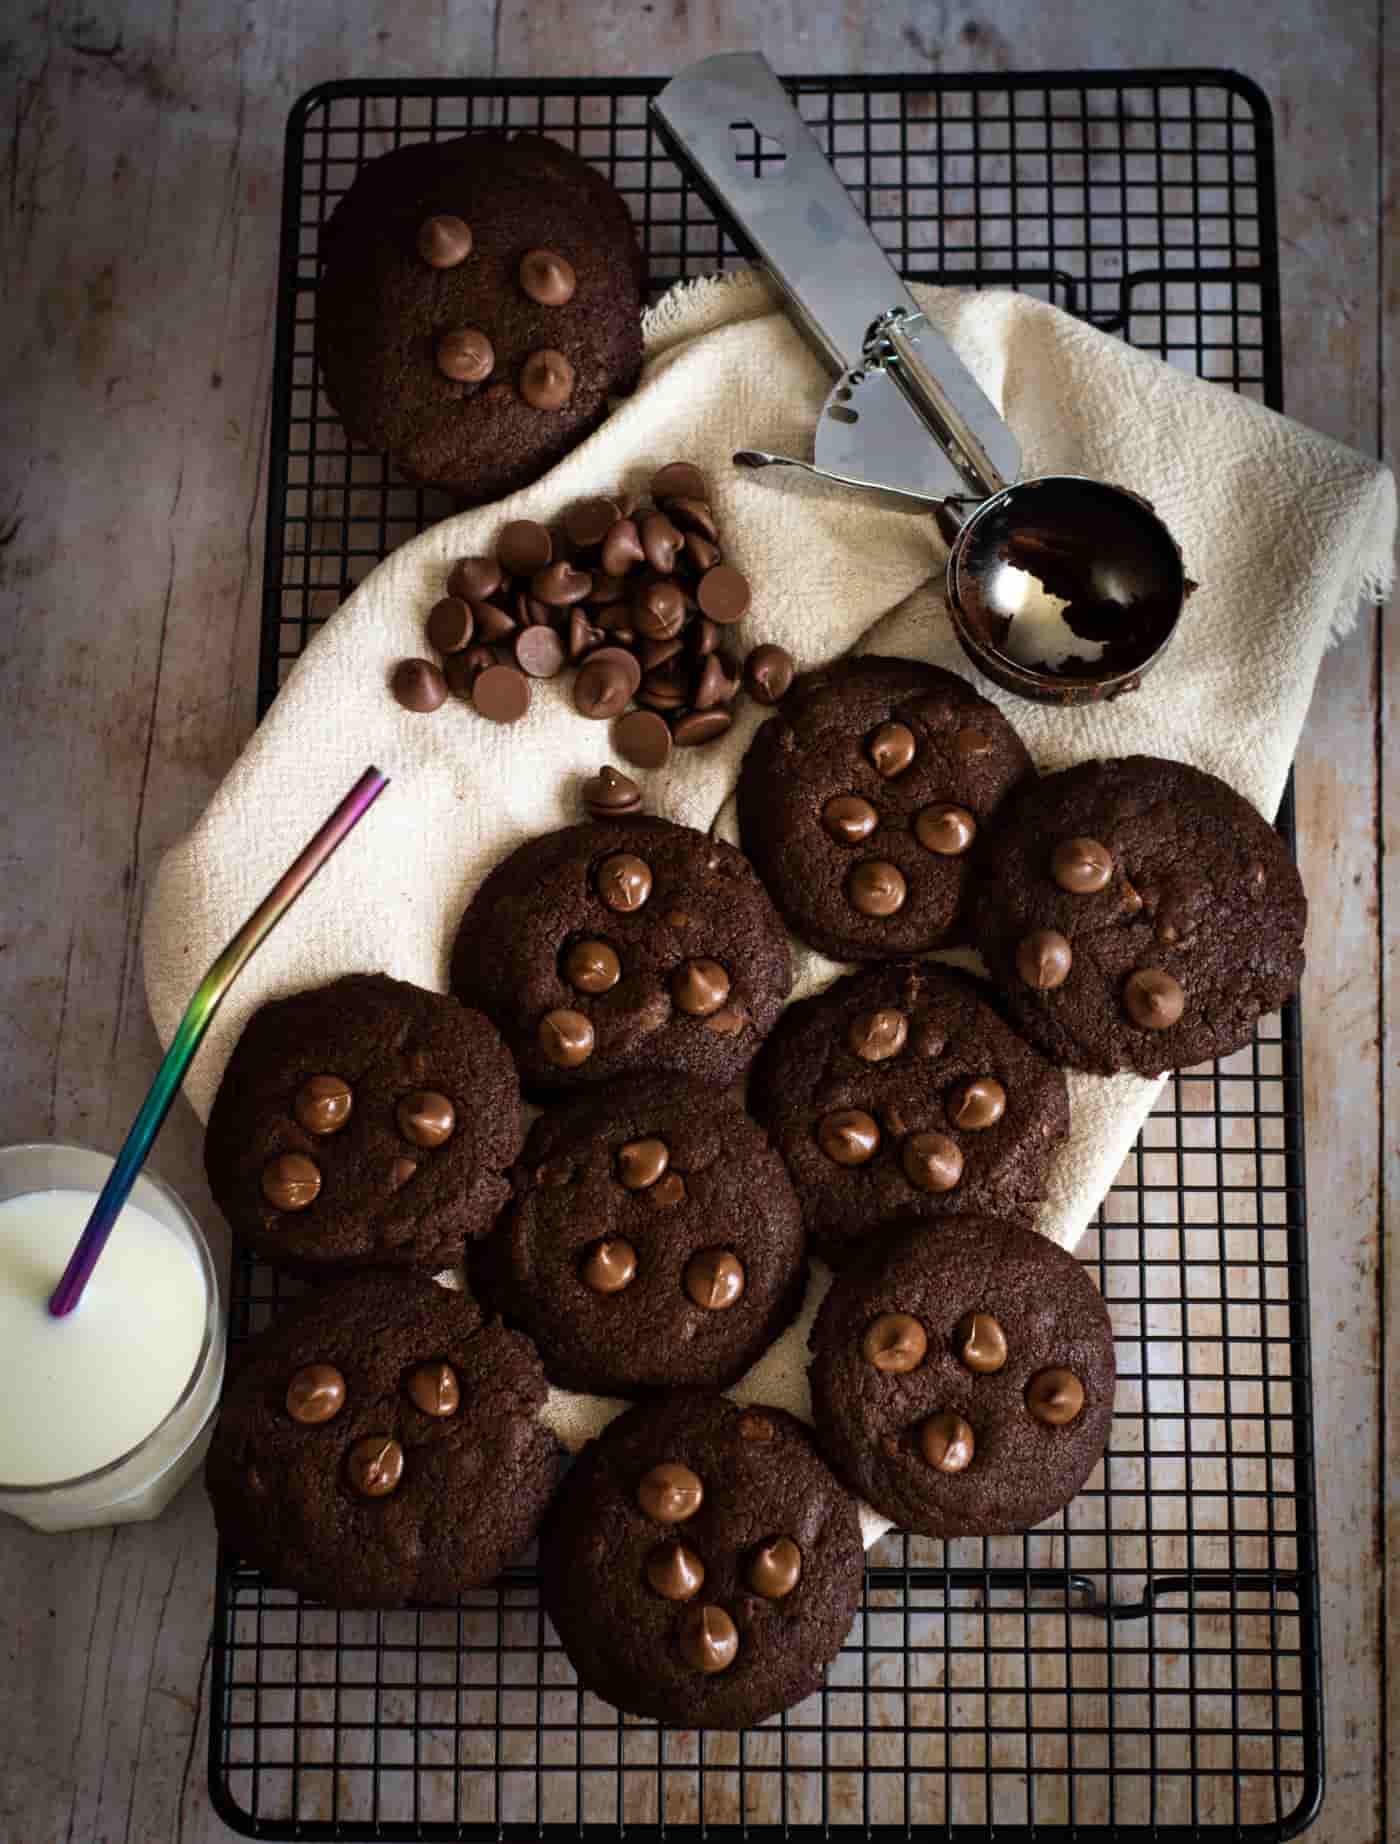 chocolate cookies on a wire rack and cream linen napkin. There is a glass of milk to the left side and an ice cream scoop at the top resting on the edge of the napkin next to some scattered chocolate chips